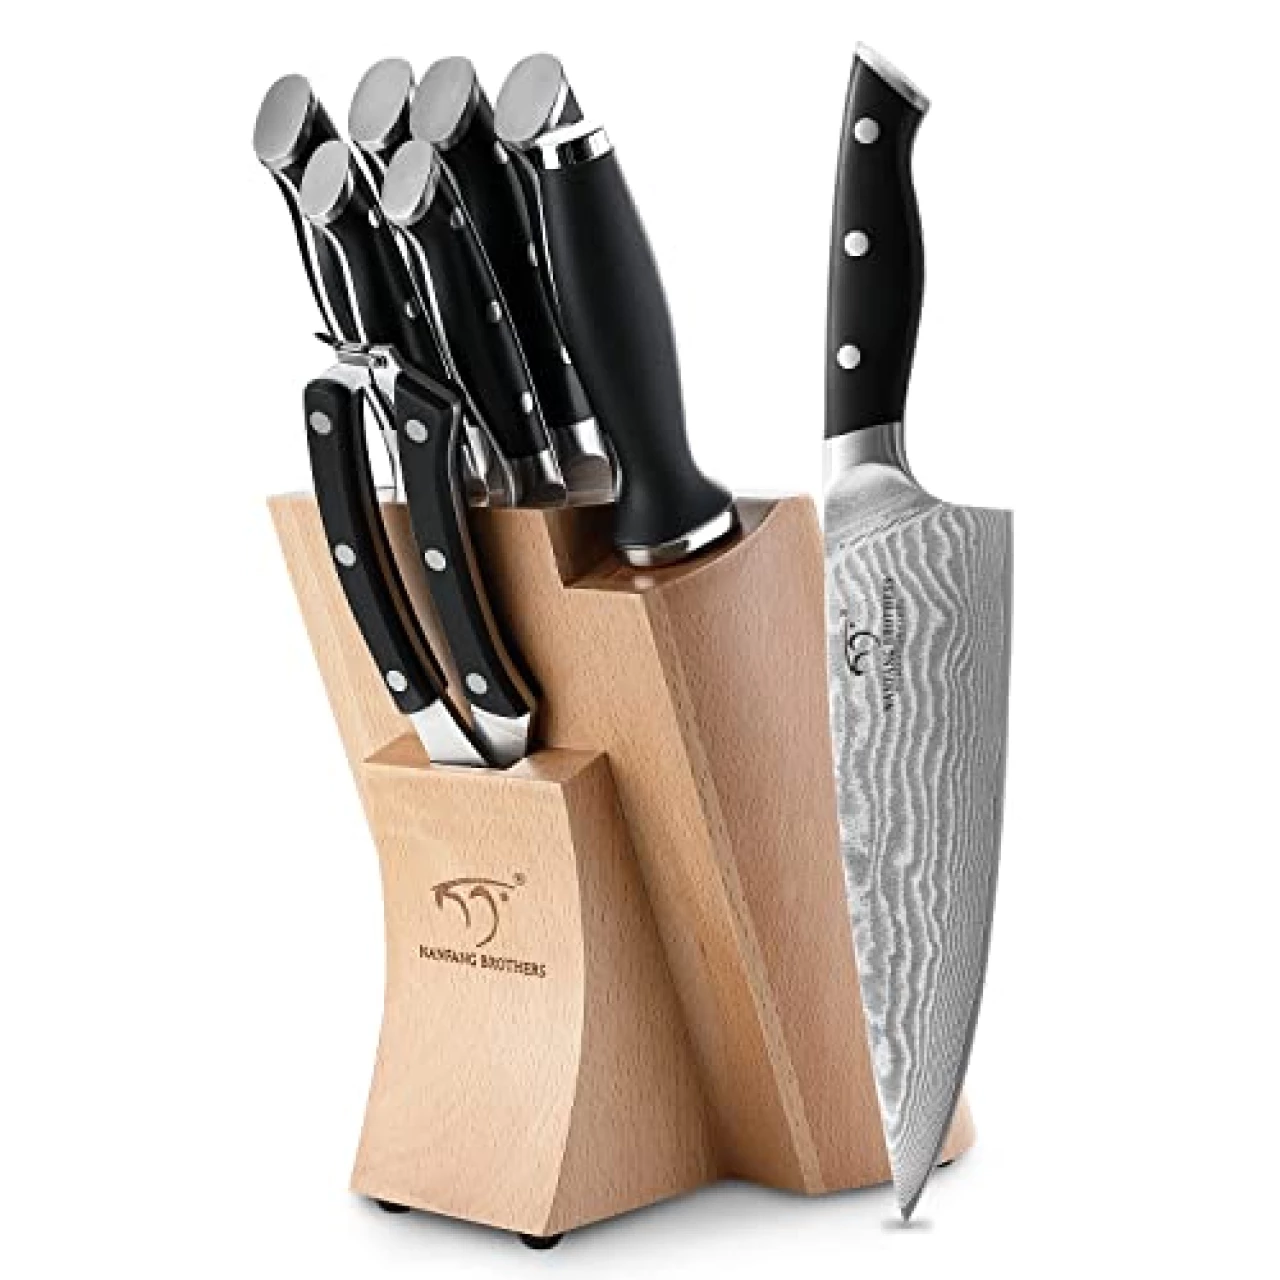 NANFANG BROTHERS Knife Set, 9 Pieces Damascus Kitchen Knife Set with Block, ABS Ergonomic Handle for Chef Knife Set, Knife Sharpener and Kitchen Shears, Knife Block Set for Chopping, Slicing &amp; Cutting